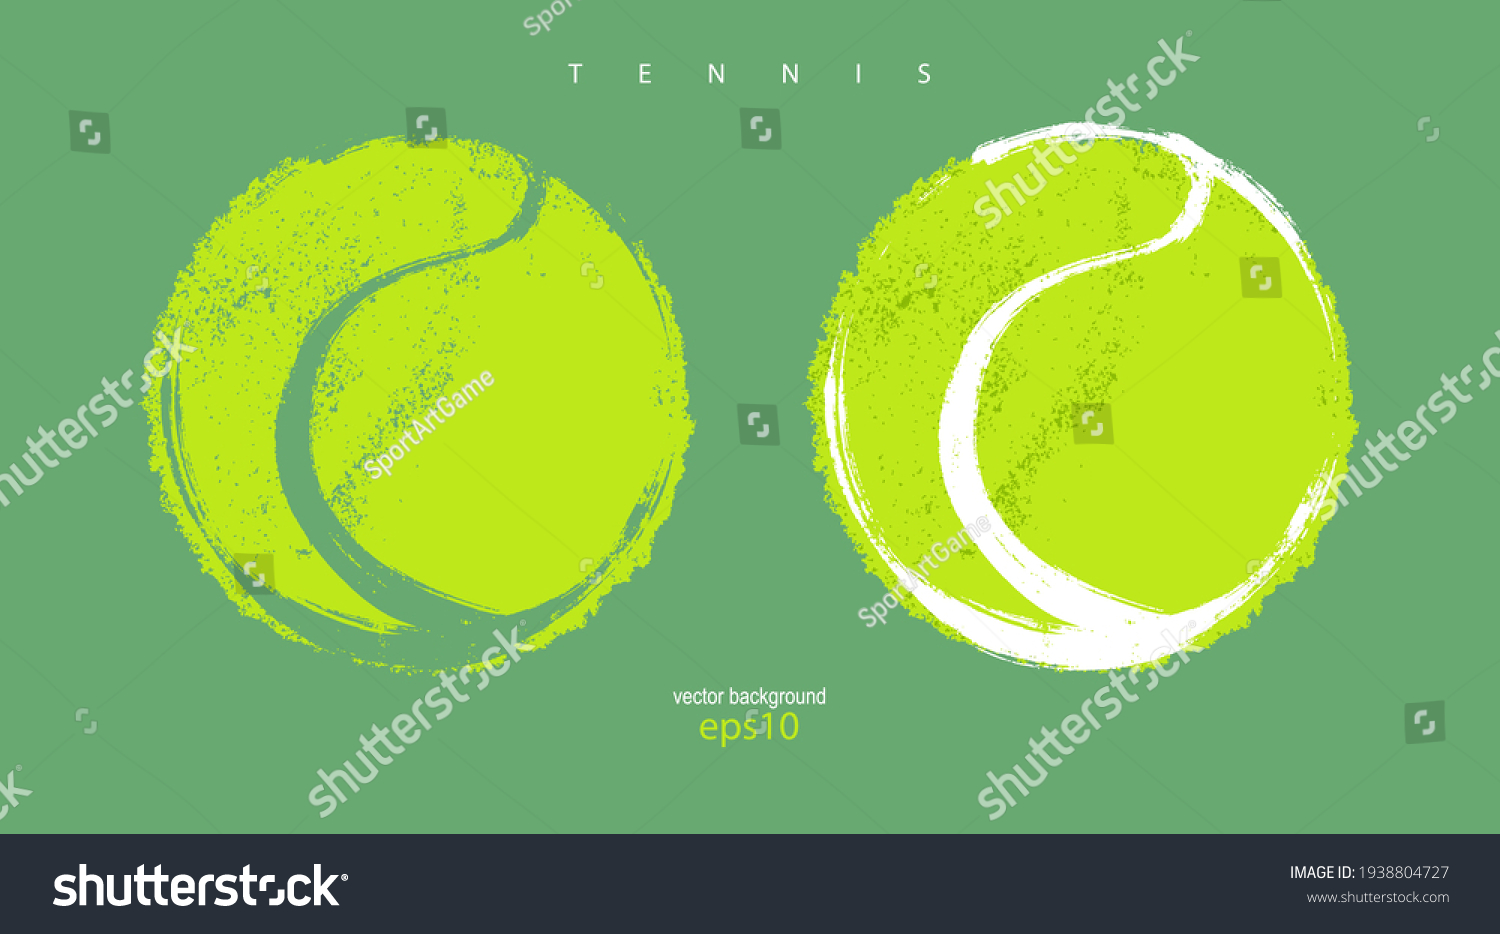 Collection of abstract tennis balls. Illustrations for design banners, posters, print for T-shirts. #1938804727